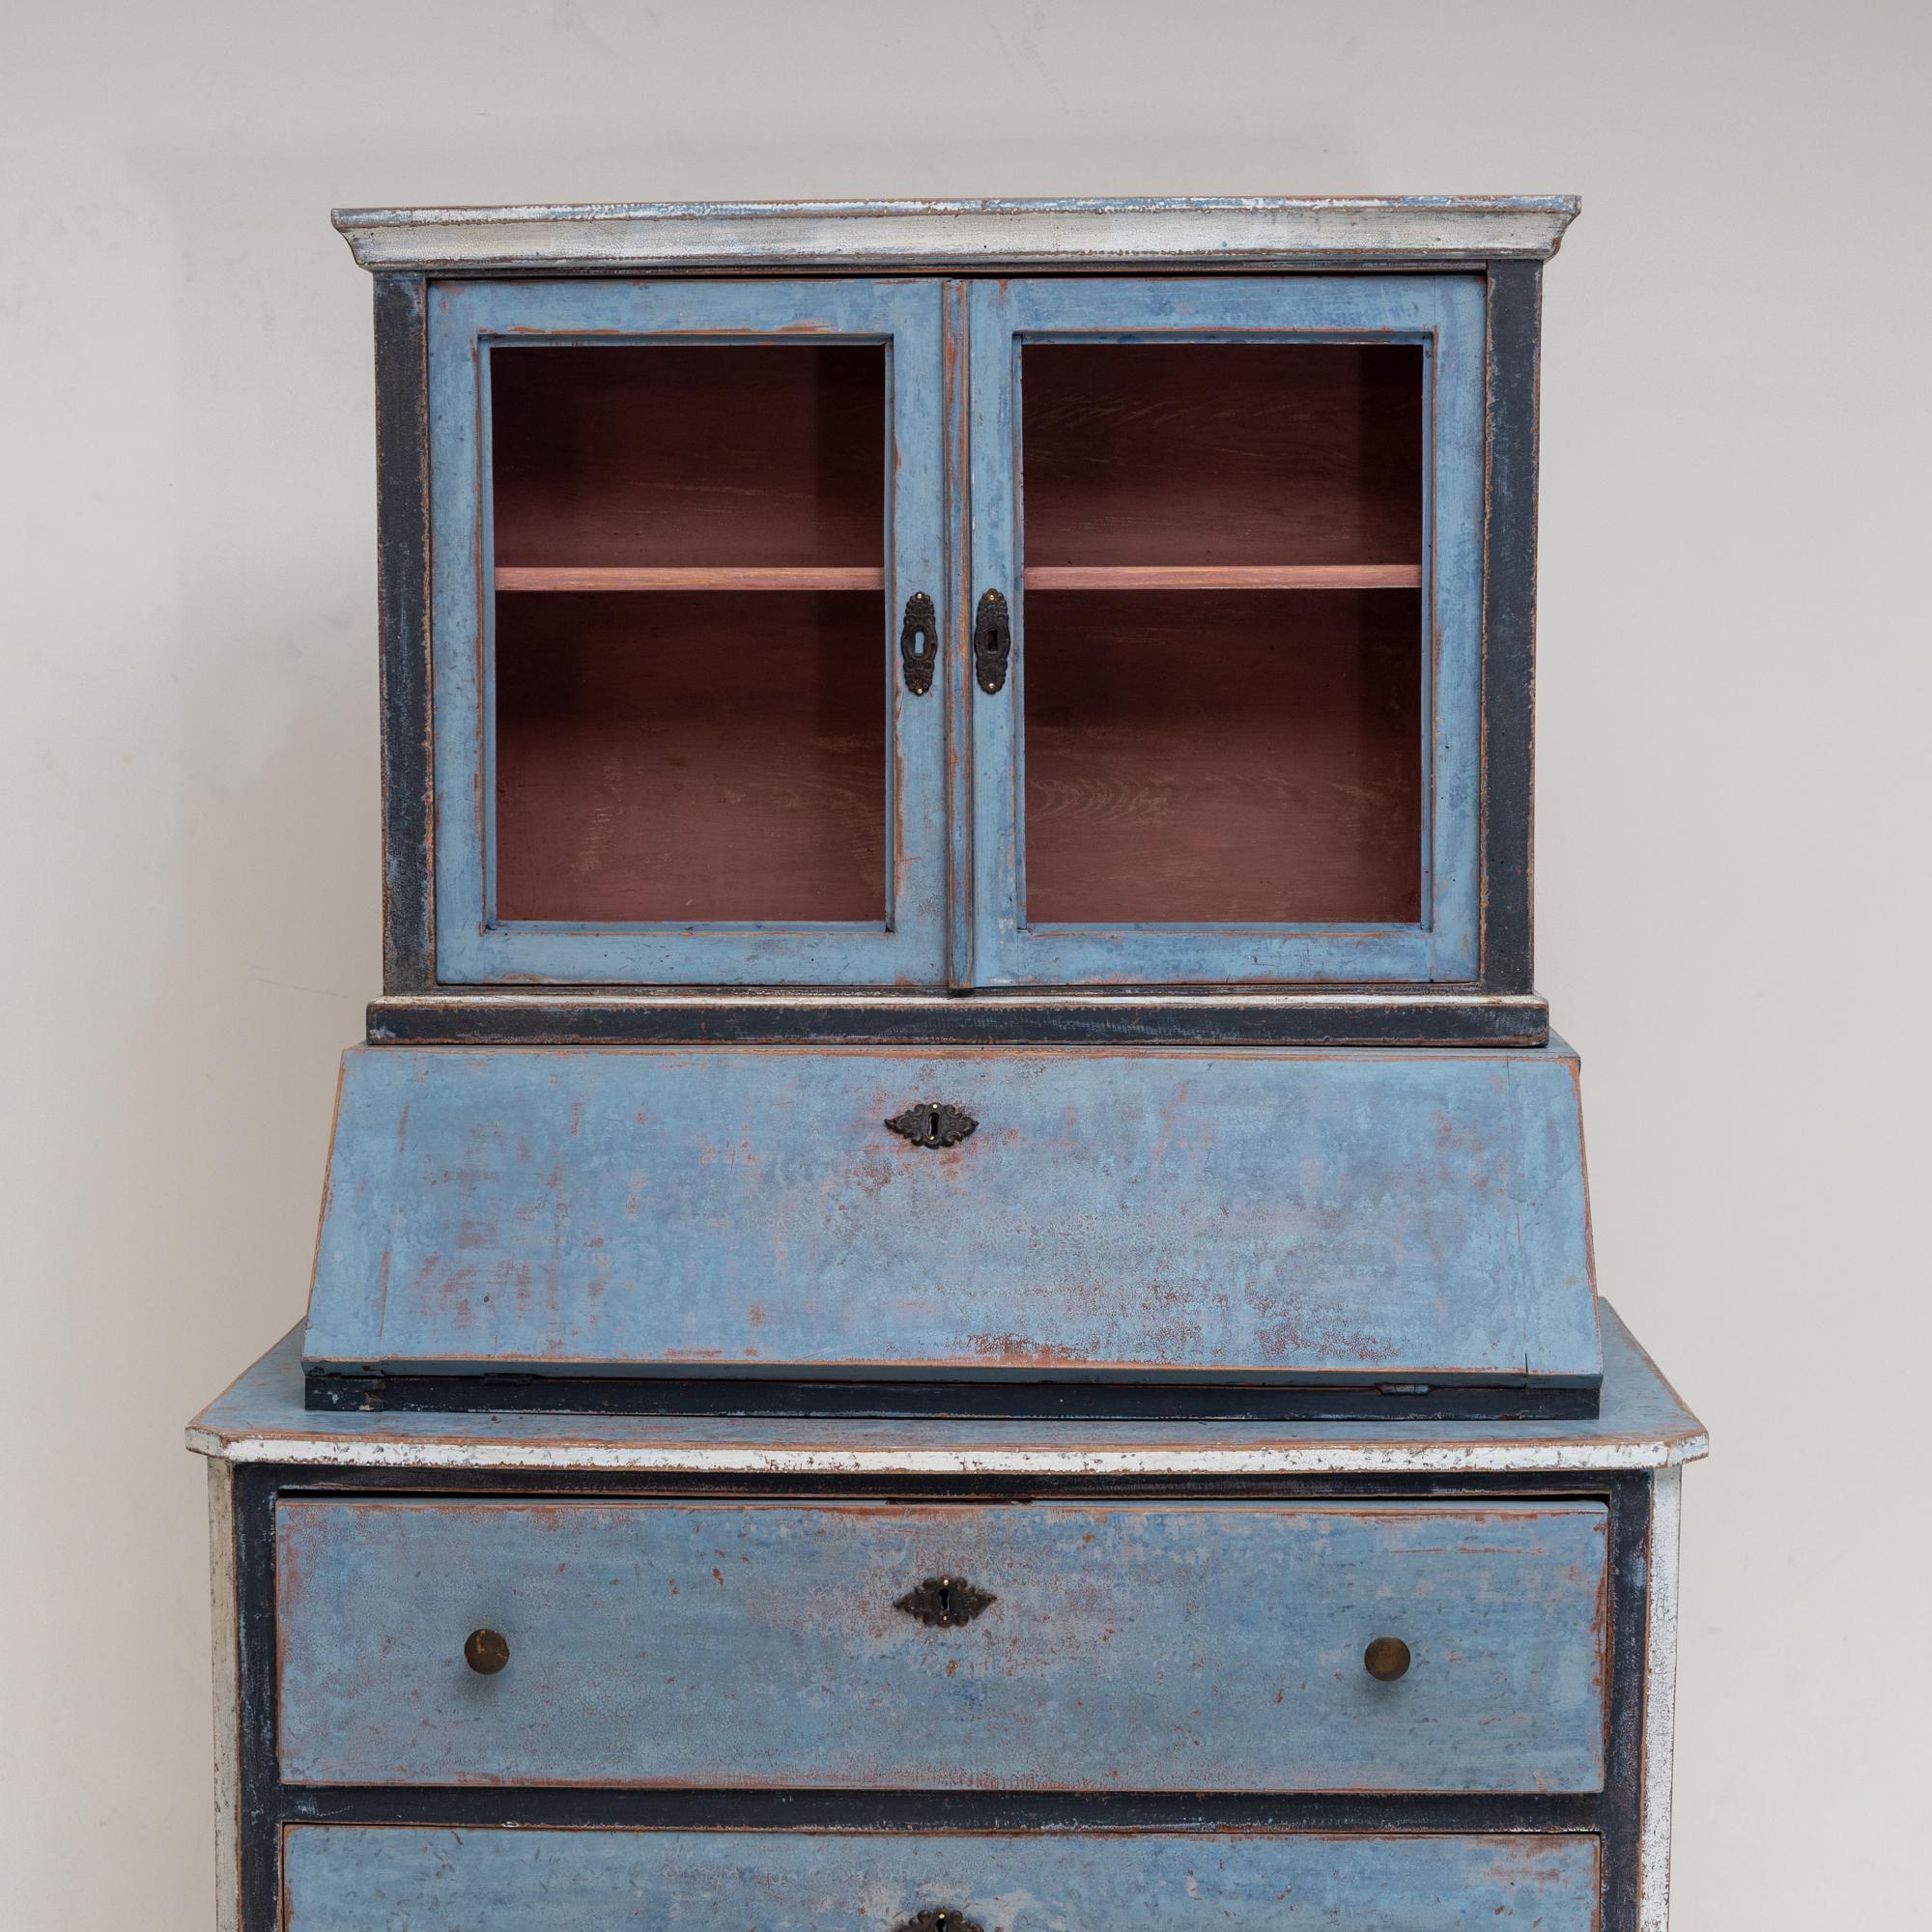 Biedermeier secretary with three-drawer chest of drawers and two-door glazed top and sloping writing flap. The light blue painting is set off in white at the edges and the interior is repainted in brick red. The setting was then given an antique